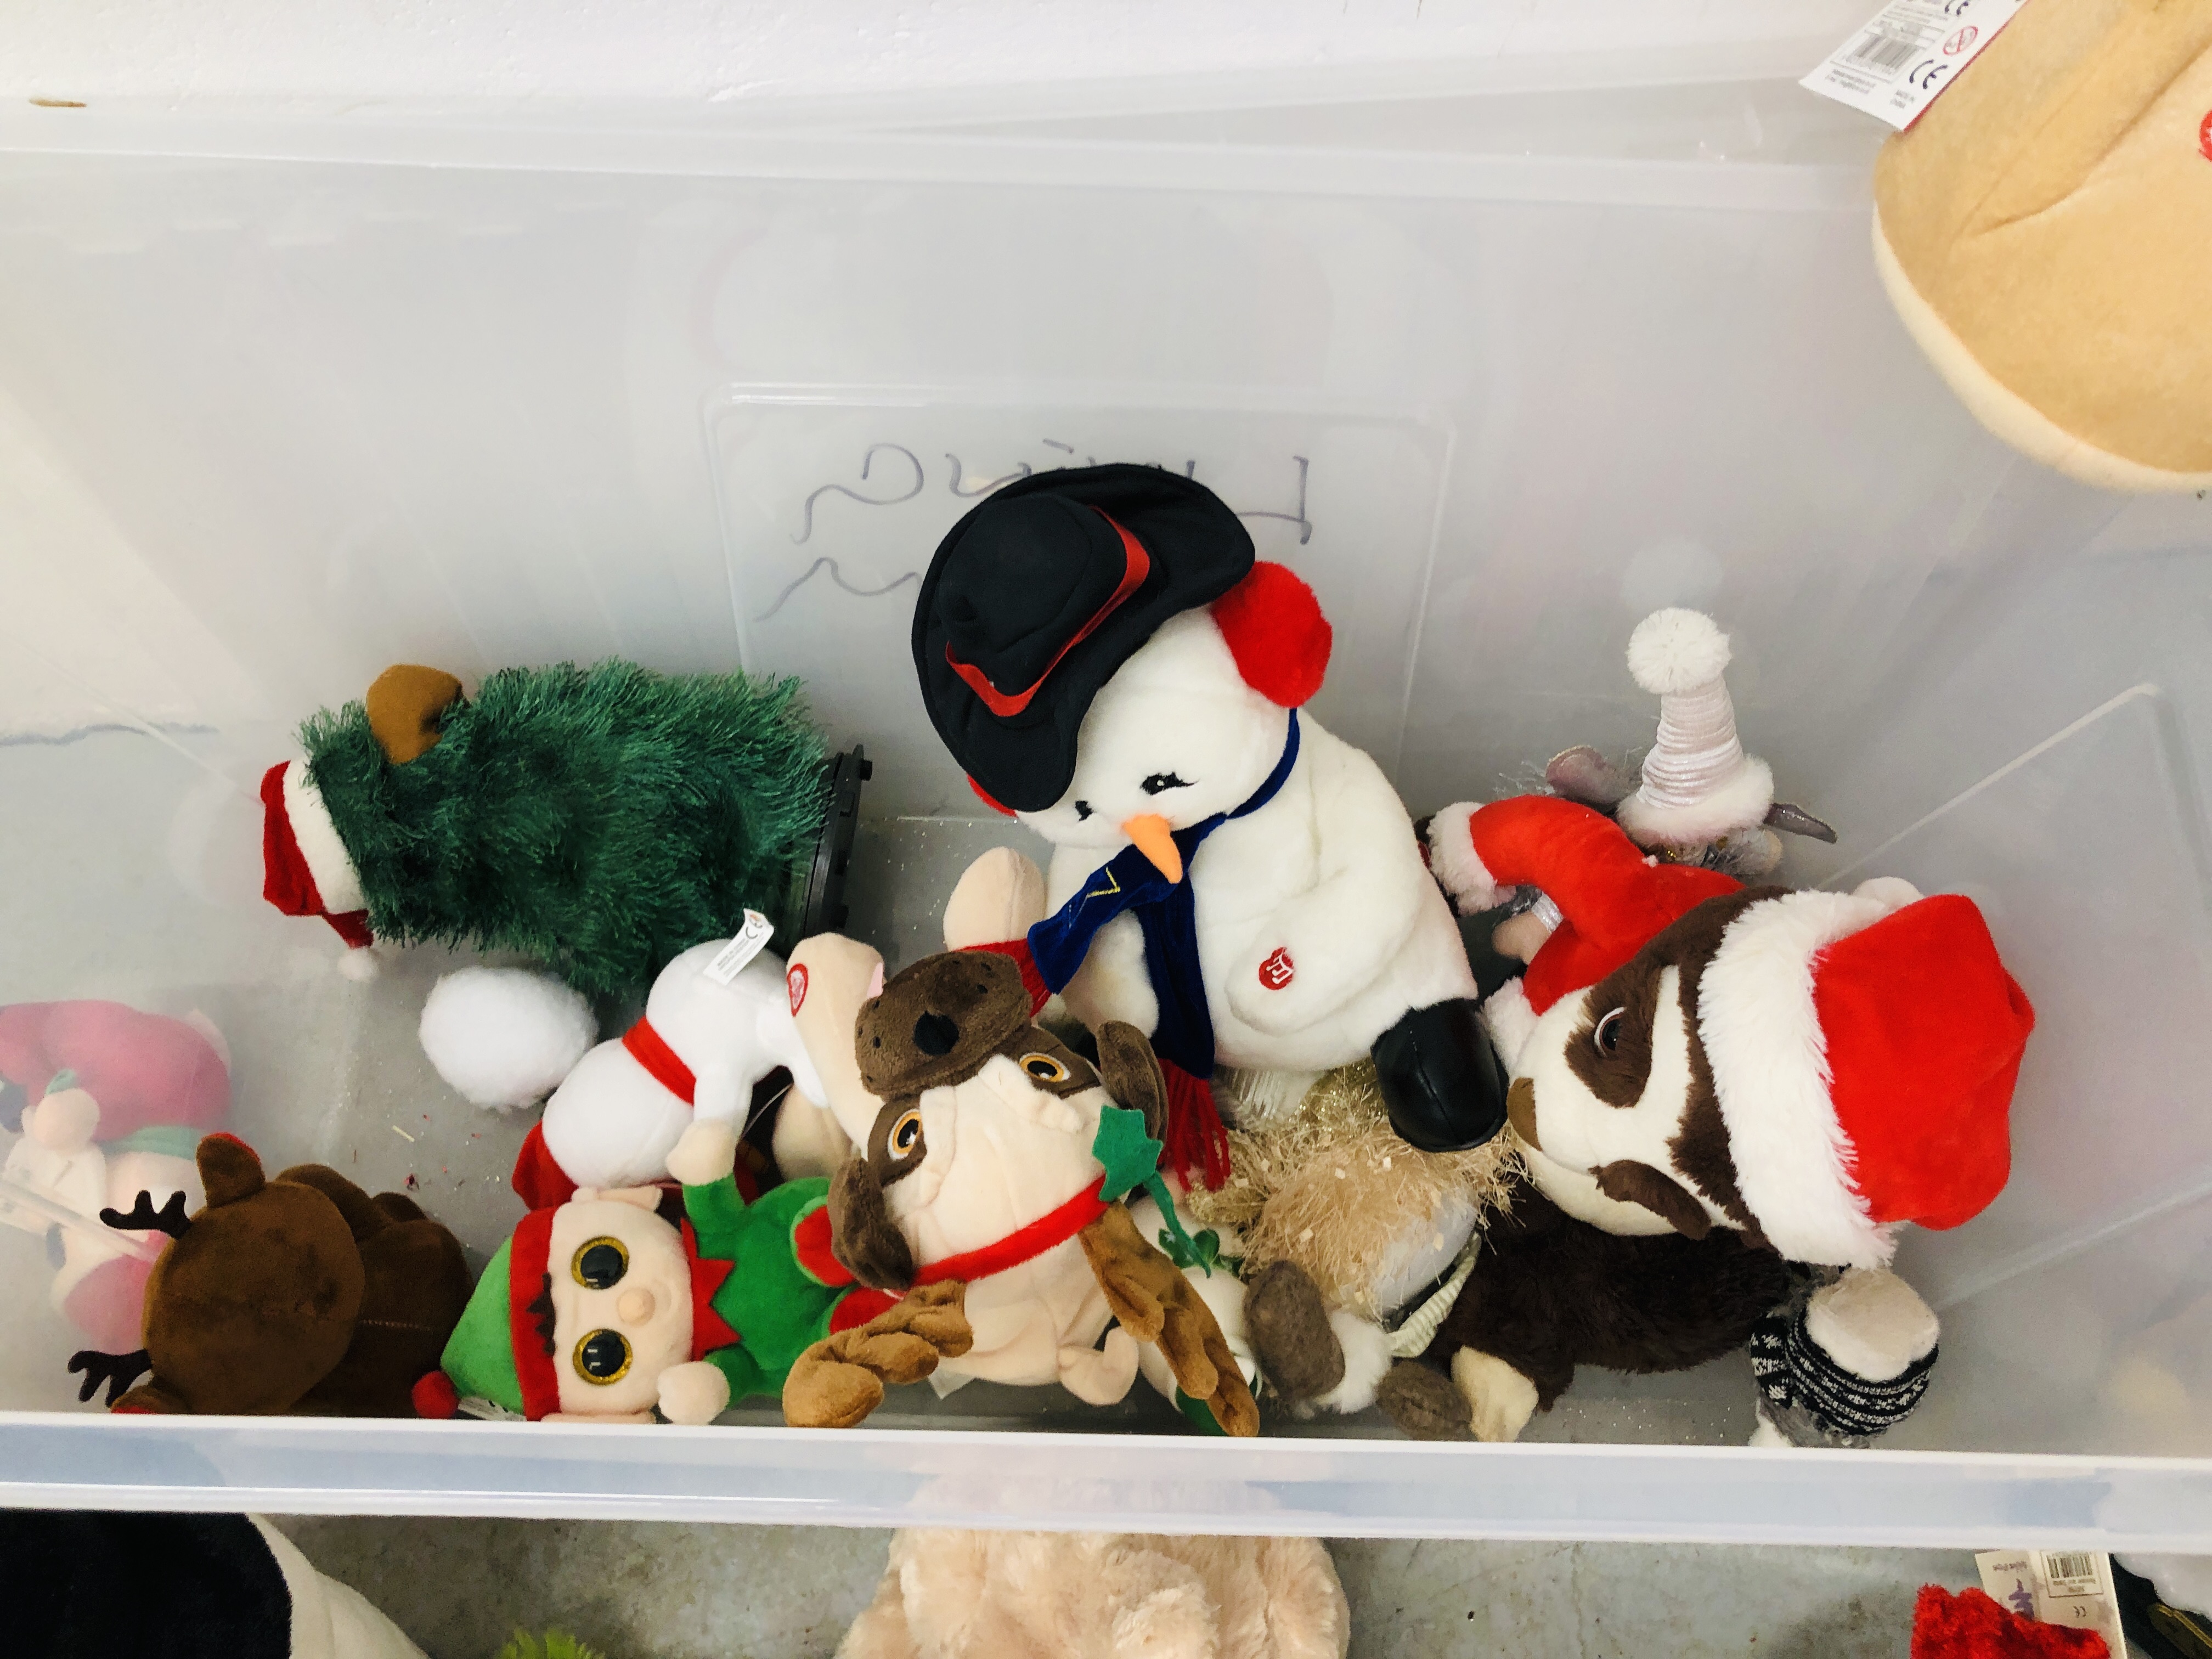 2 LARGE BOXES CONTAINING APPROXIMATELY 30 SOFT CHRISTMAS CHARACTERS, - Image 6 of 8